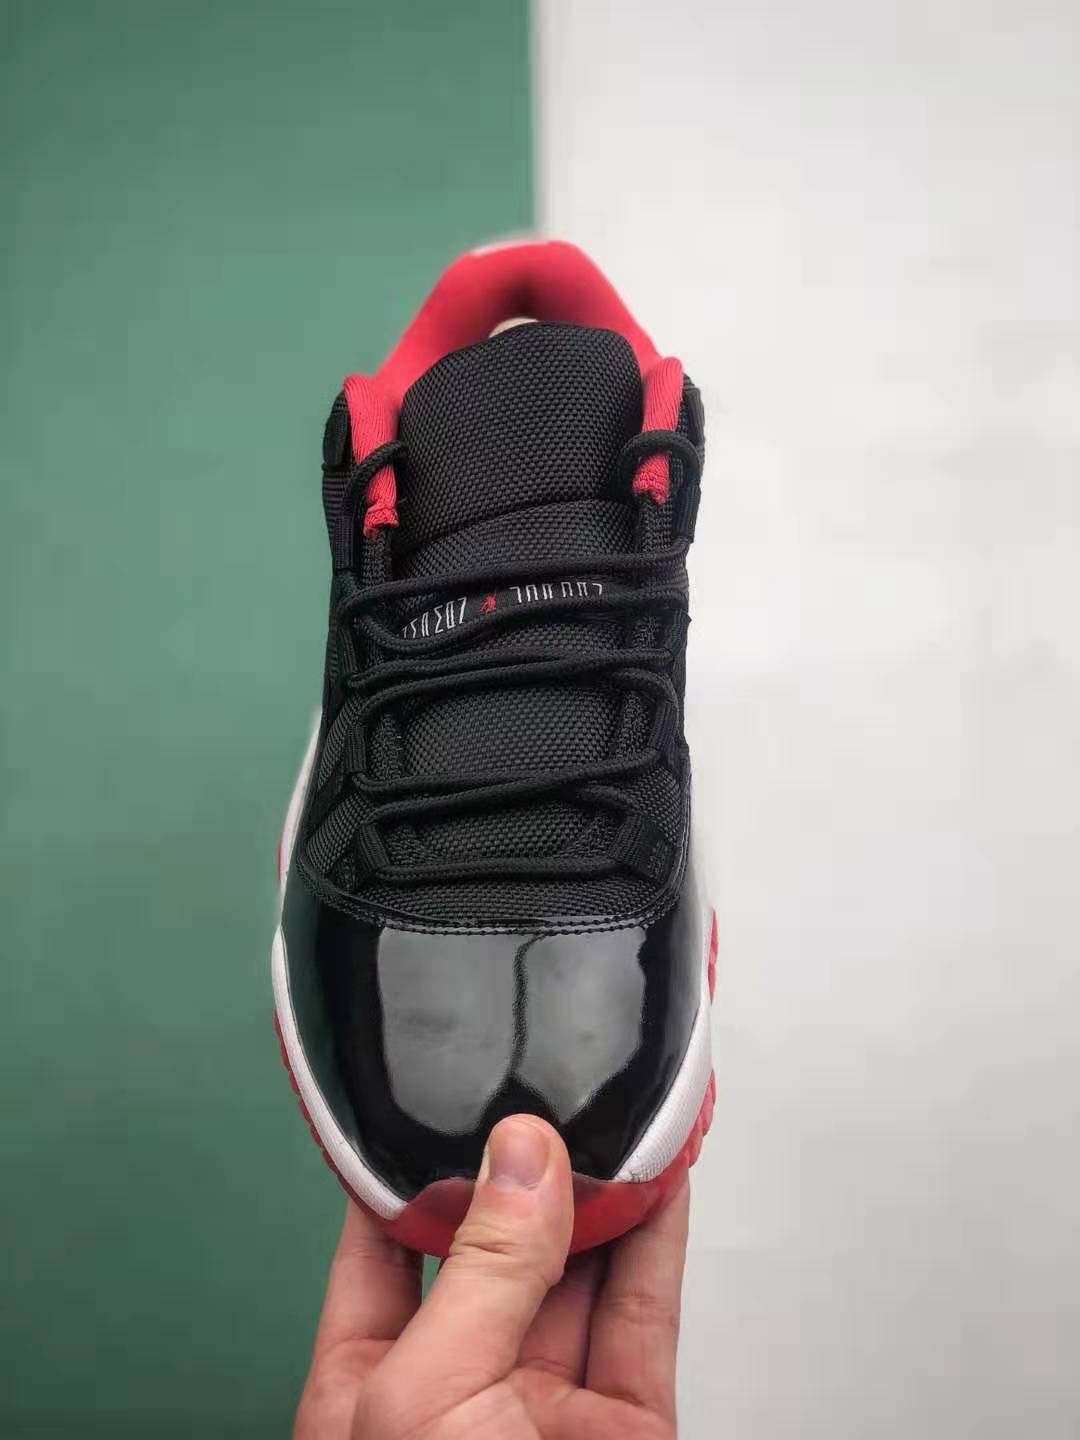 Air Jordan 11 Retro Low - Bred 528895-012: Iconic Style & Classic Design | Free Shipping